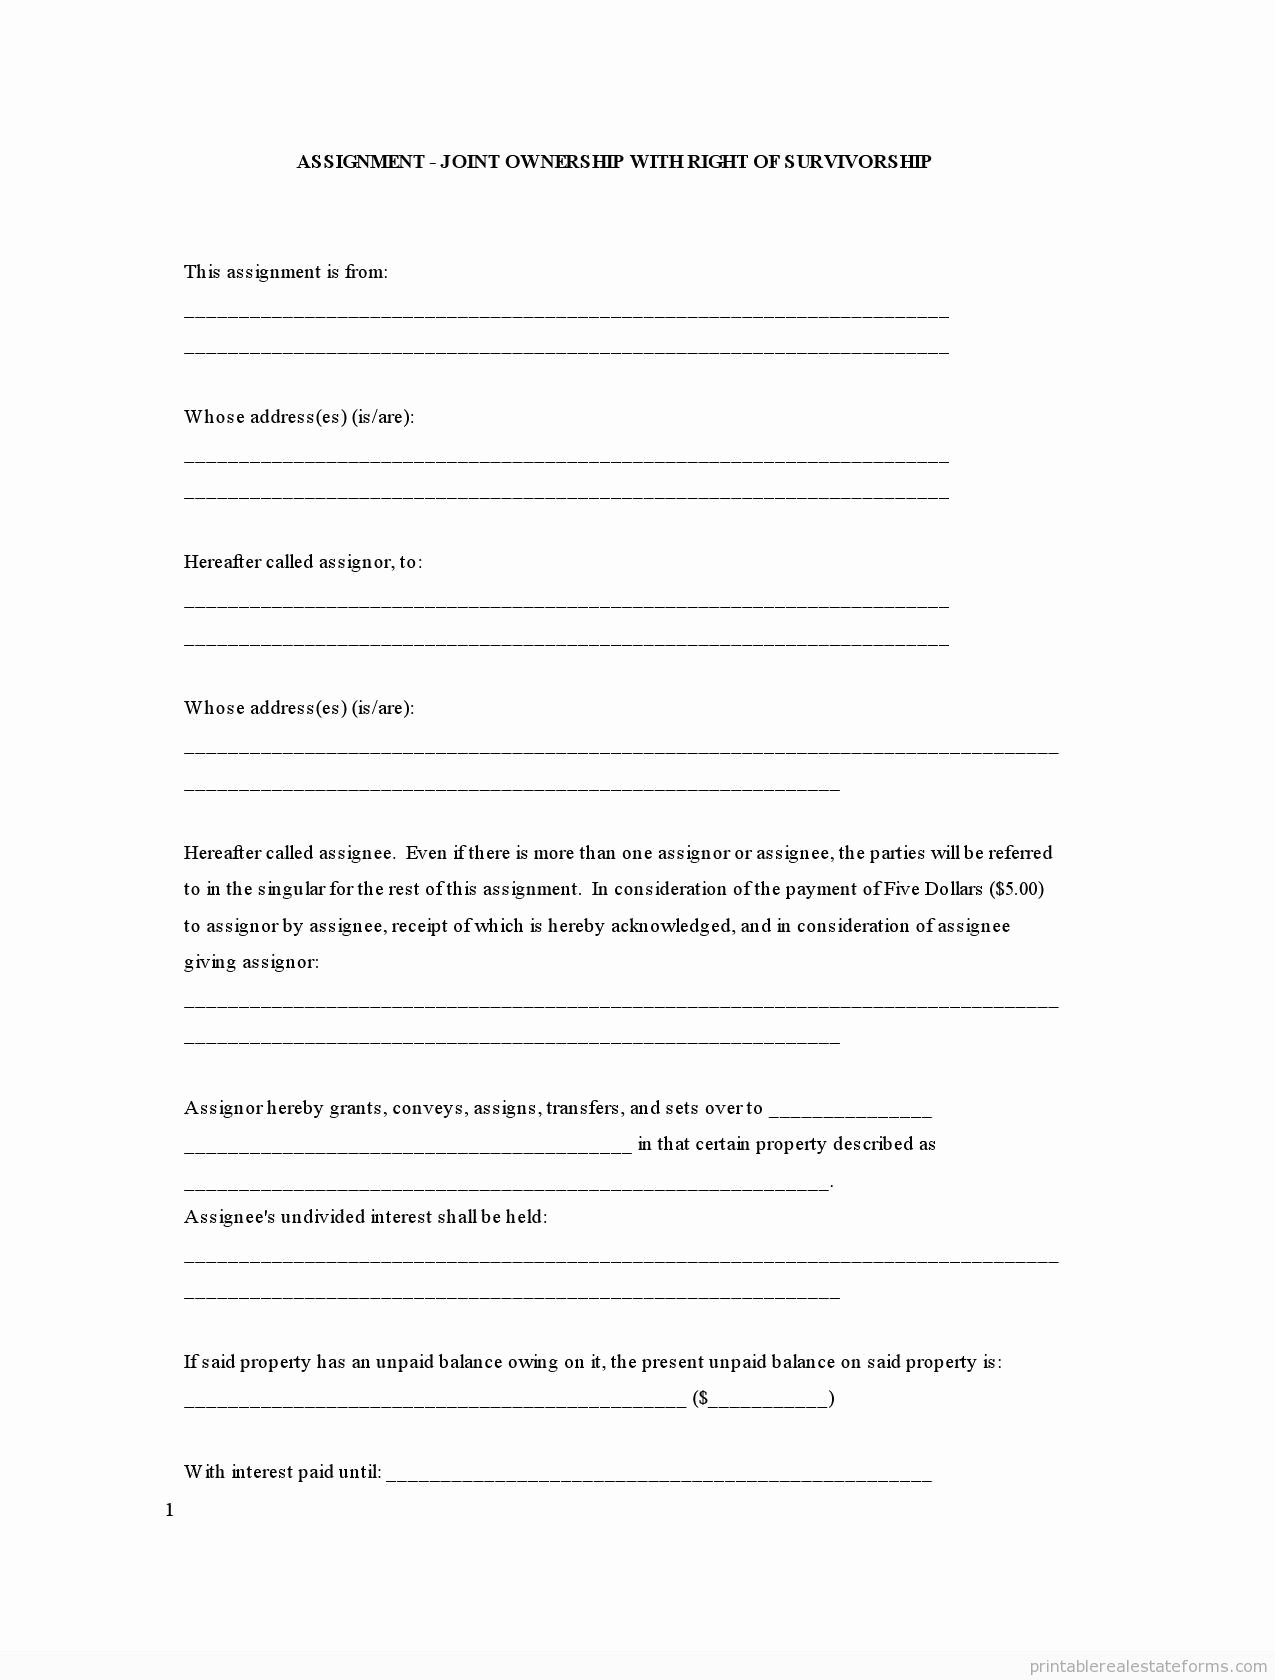 Co-ownership Agreement Real Estate Template New Free Letter assignment Free for Joint Ownership